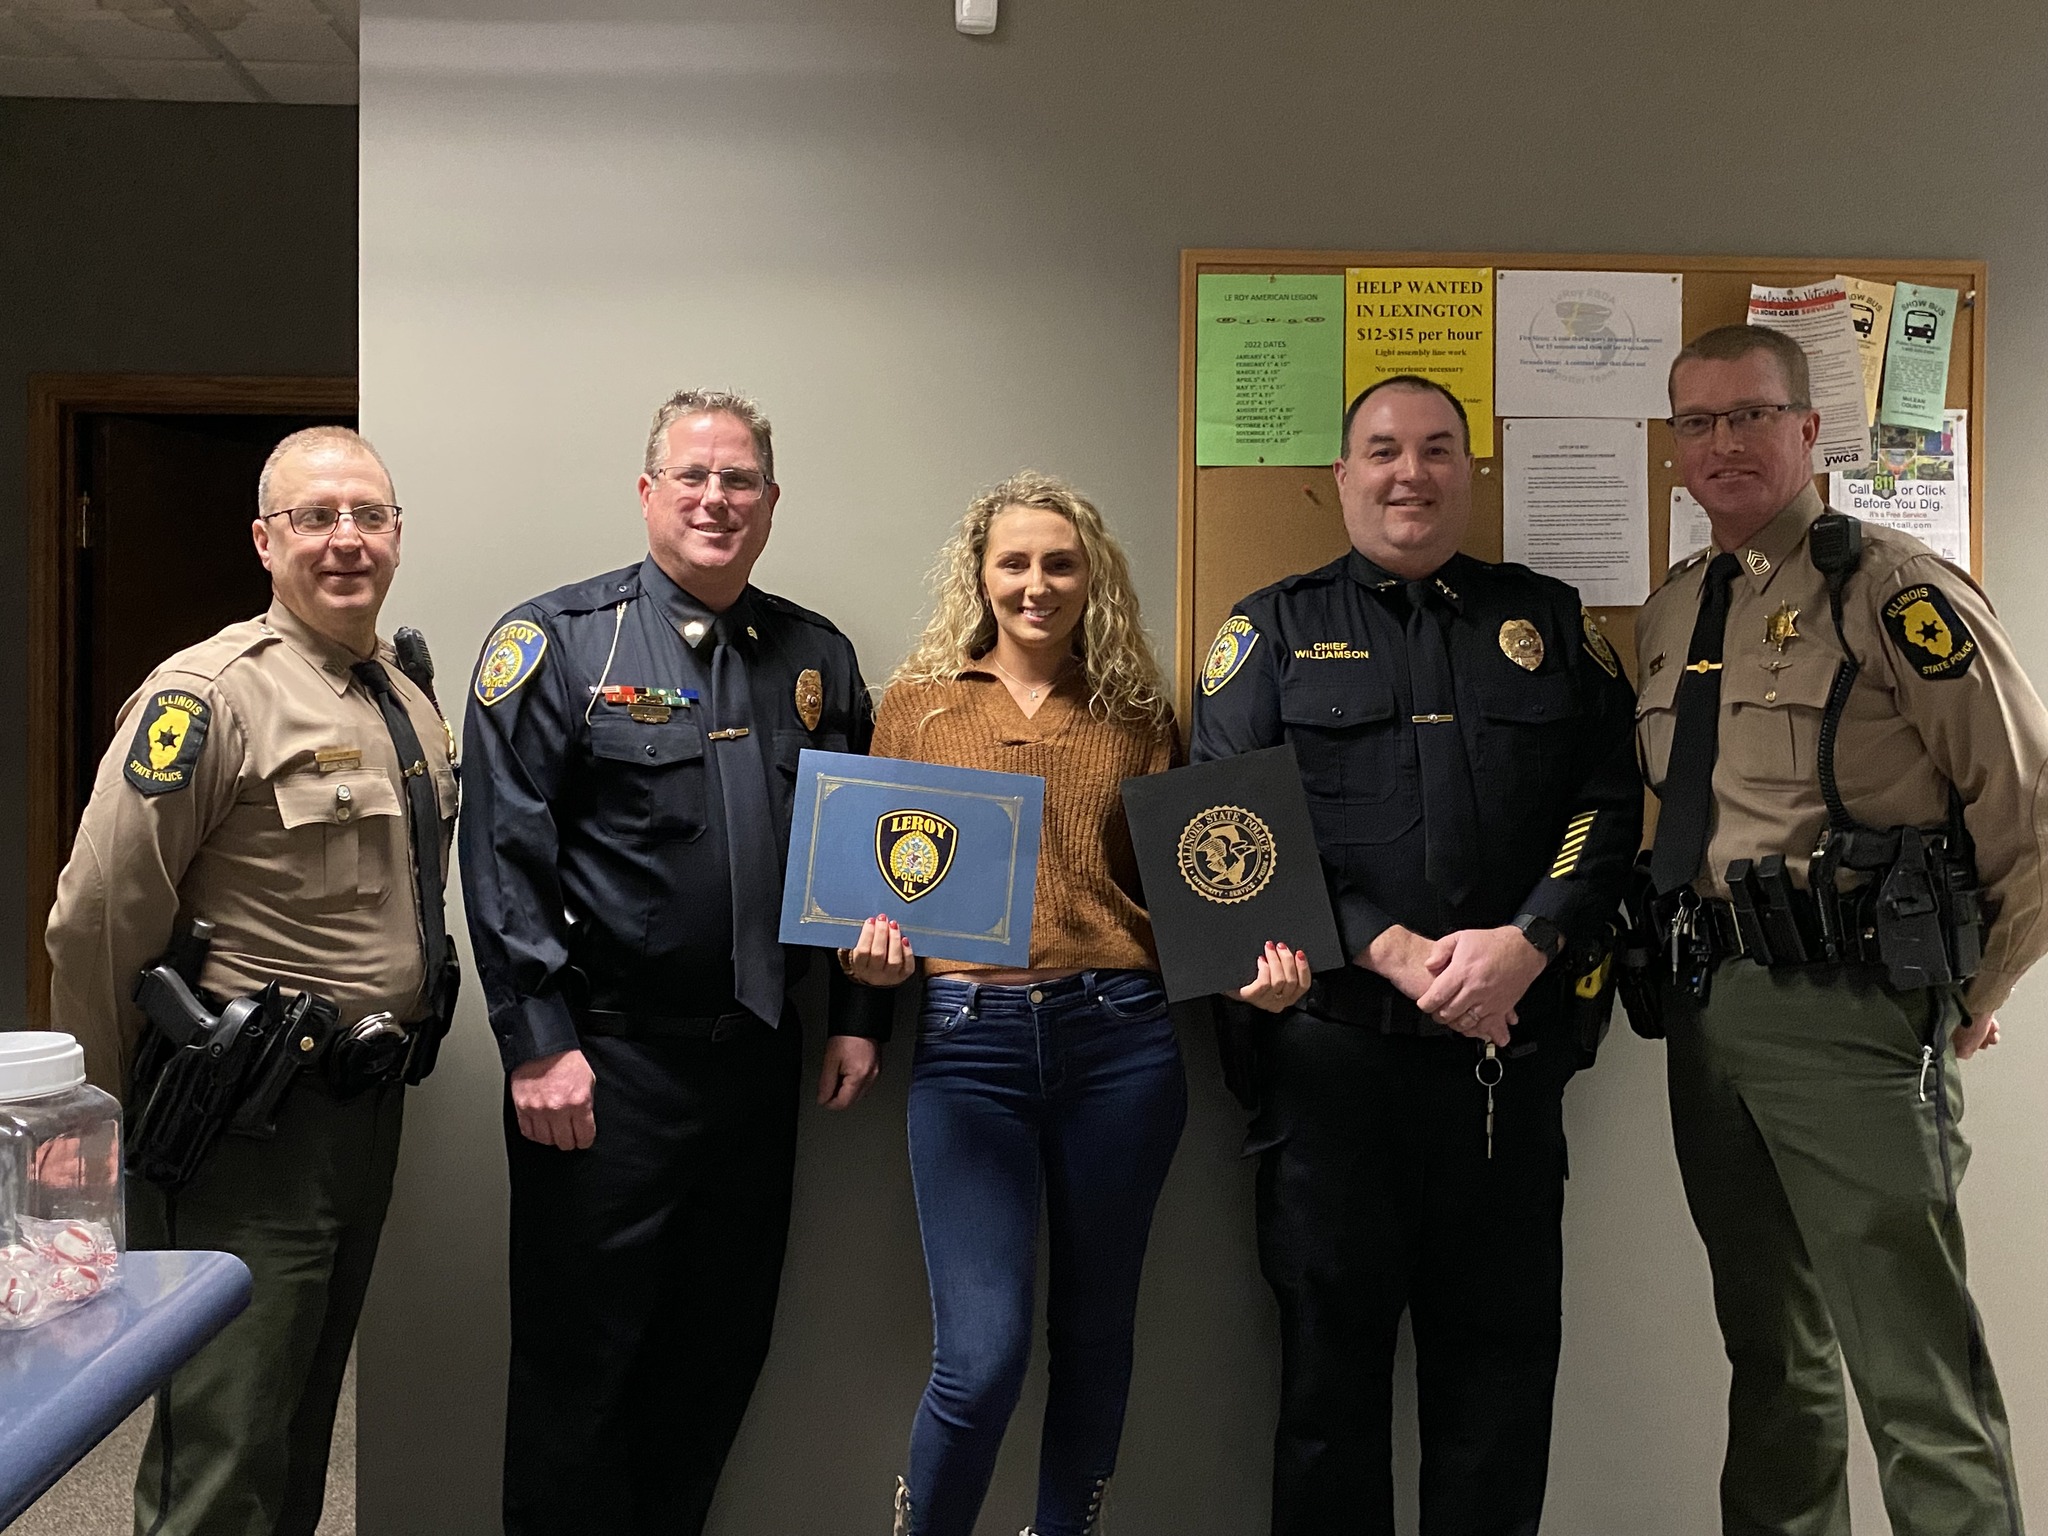 LeRoy Police honoring Bloomington for helping save the life of a toddler